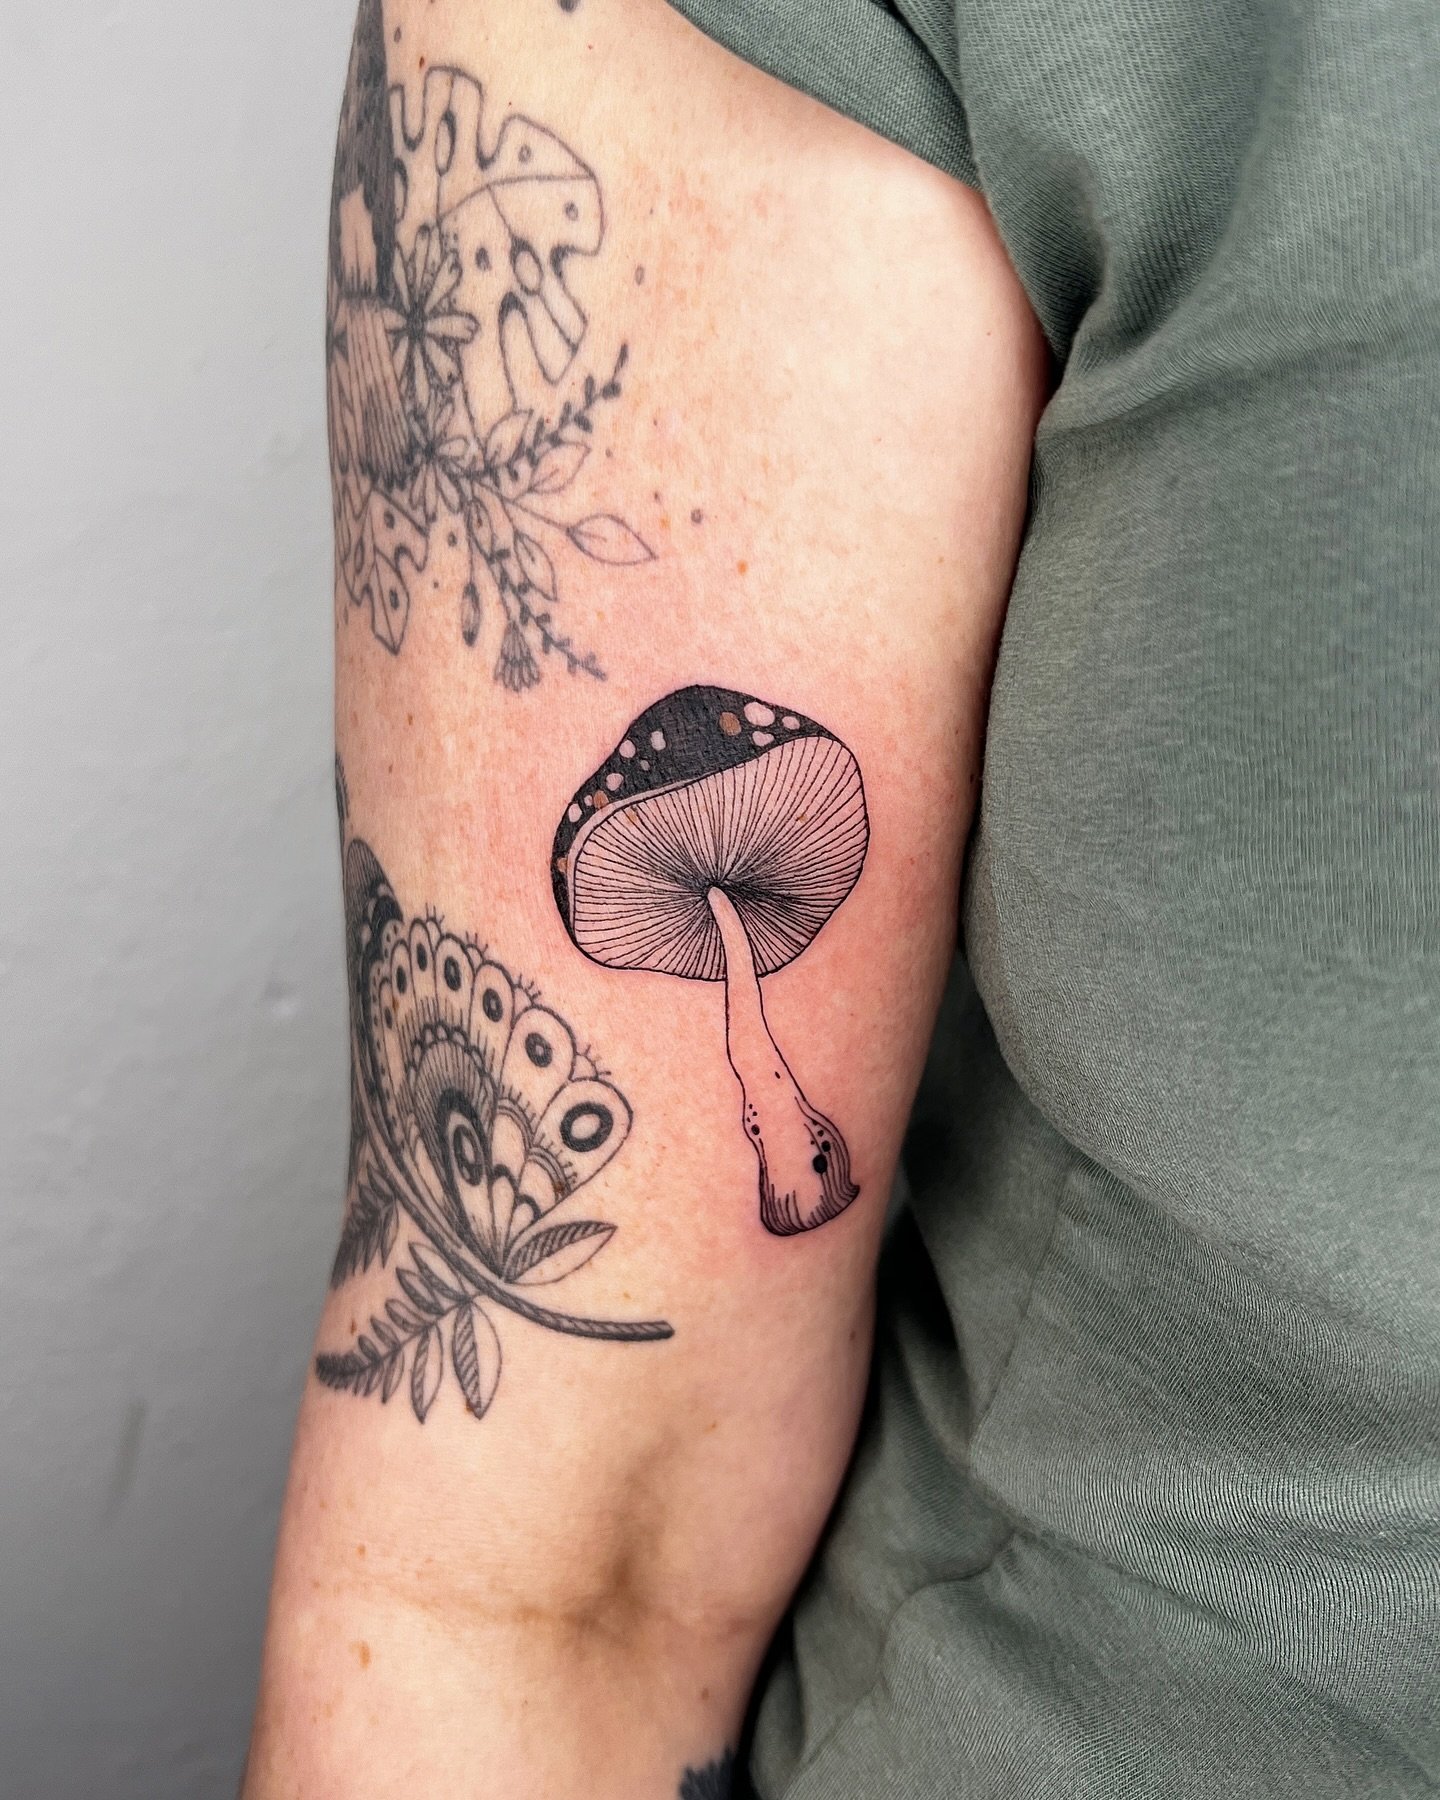 Added a #mushroom from my flash next to a healed collection from the past 7 years. Thank you so much Imke for trusting me since 2017💞🍄✨

Btw Can&rsquo;t wait for #mushroomseason 😍

⫸ 
Booking info: If you want to get inked, please stay patient. My